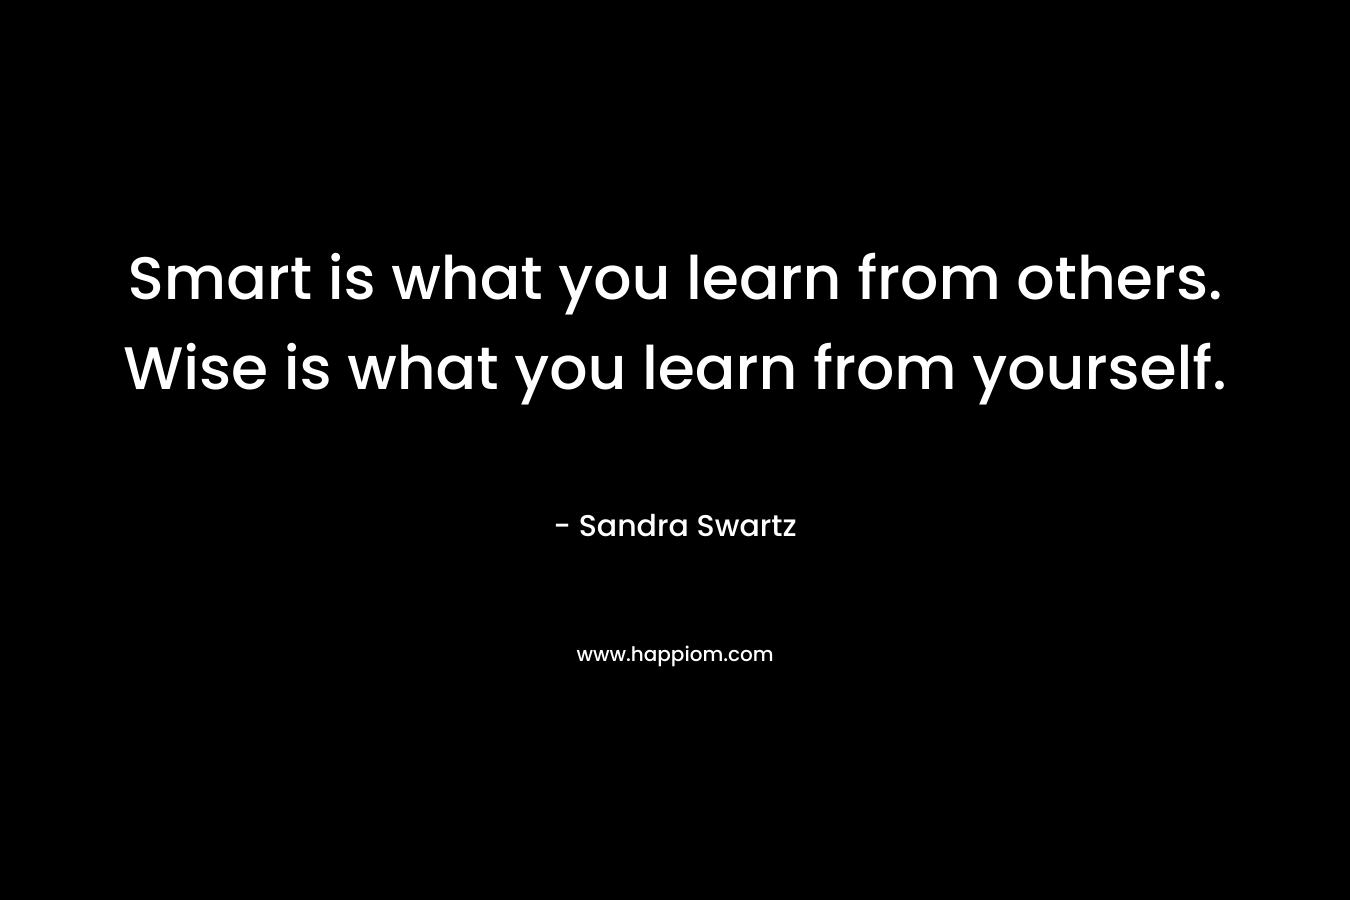 Smart is what you learn from others. Wise is what you learn from yourself. – Sandra Swartz